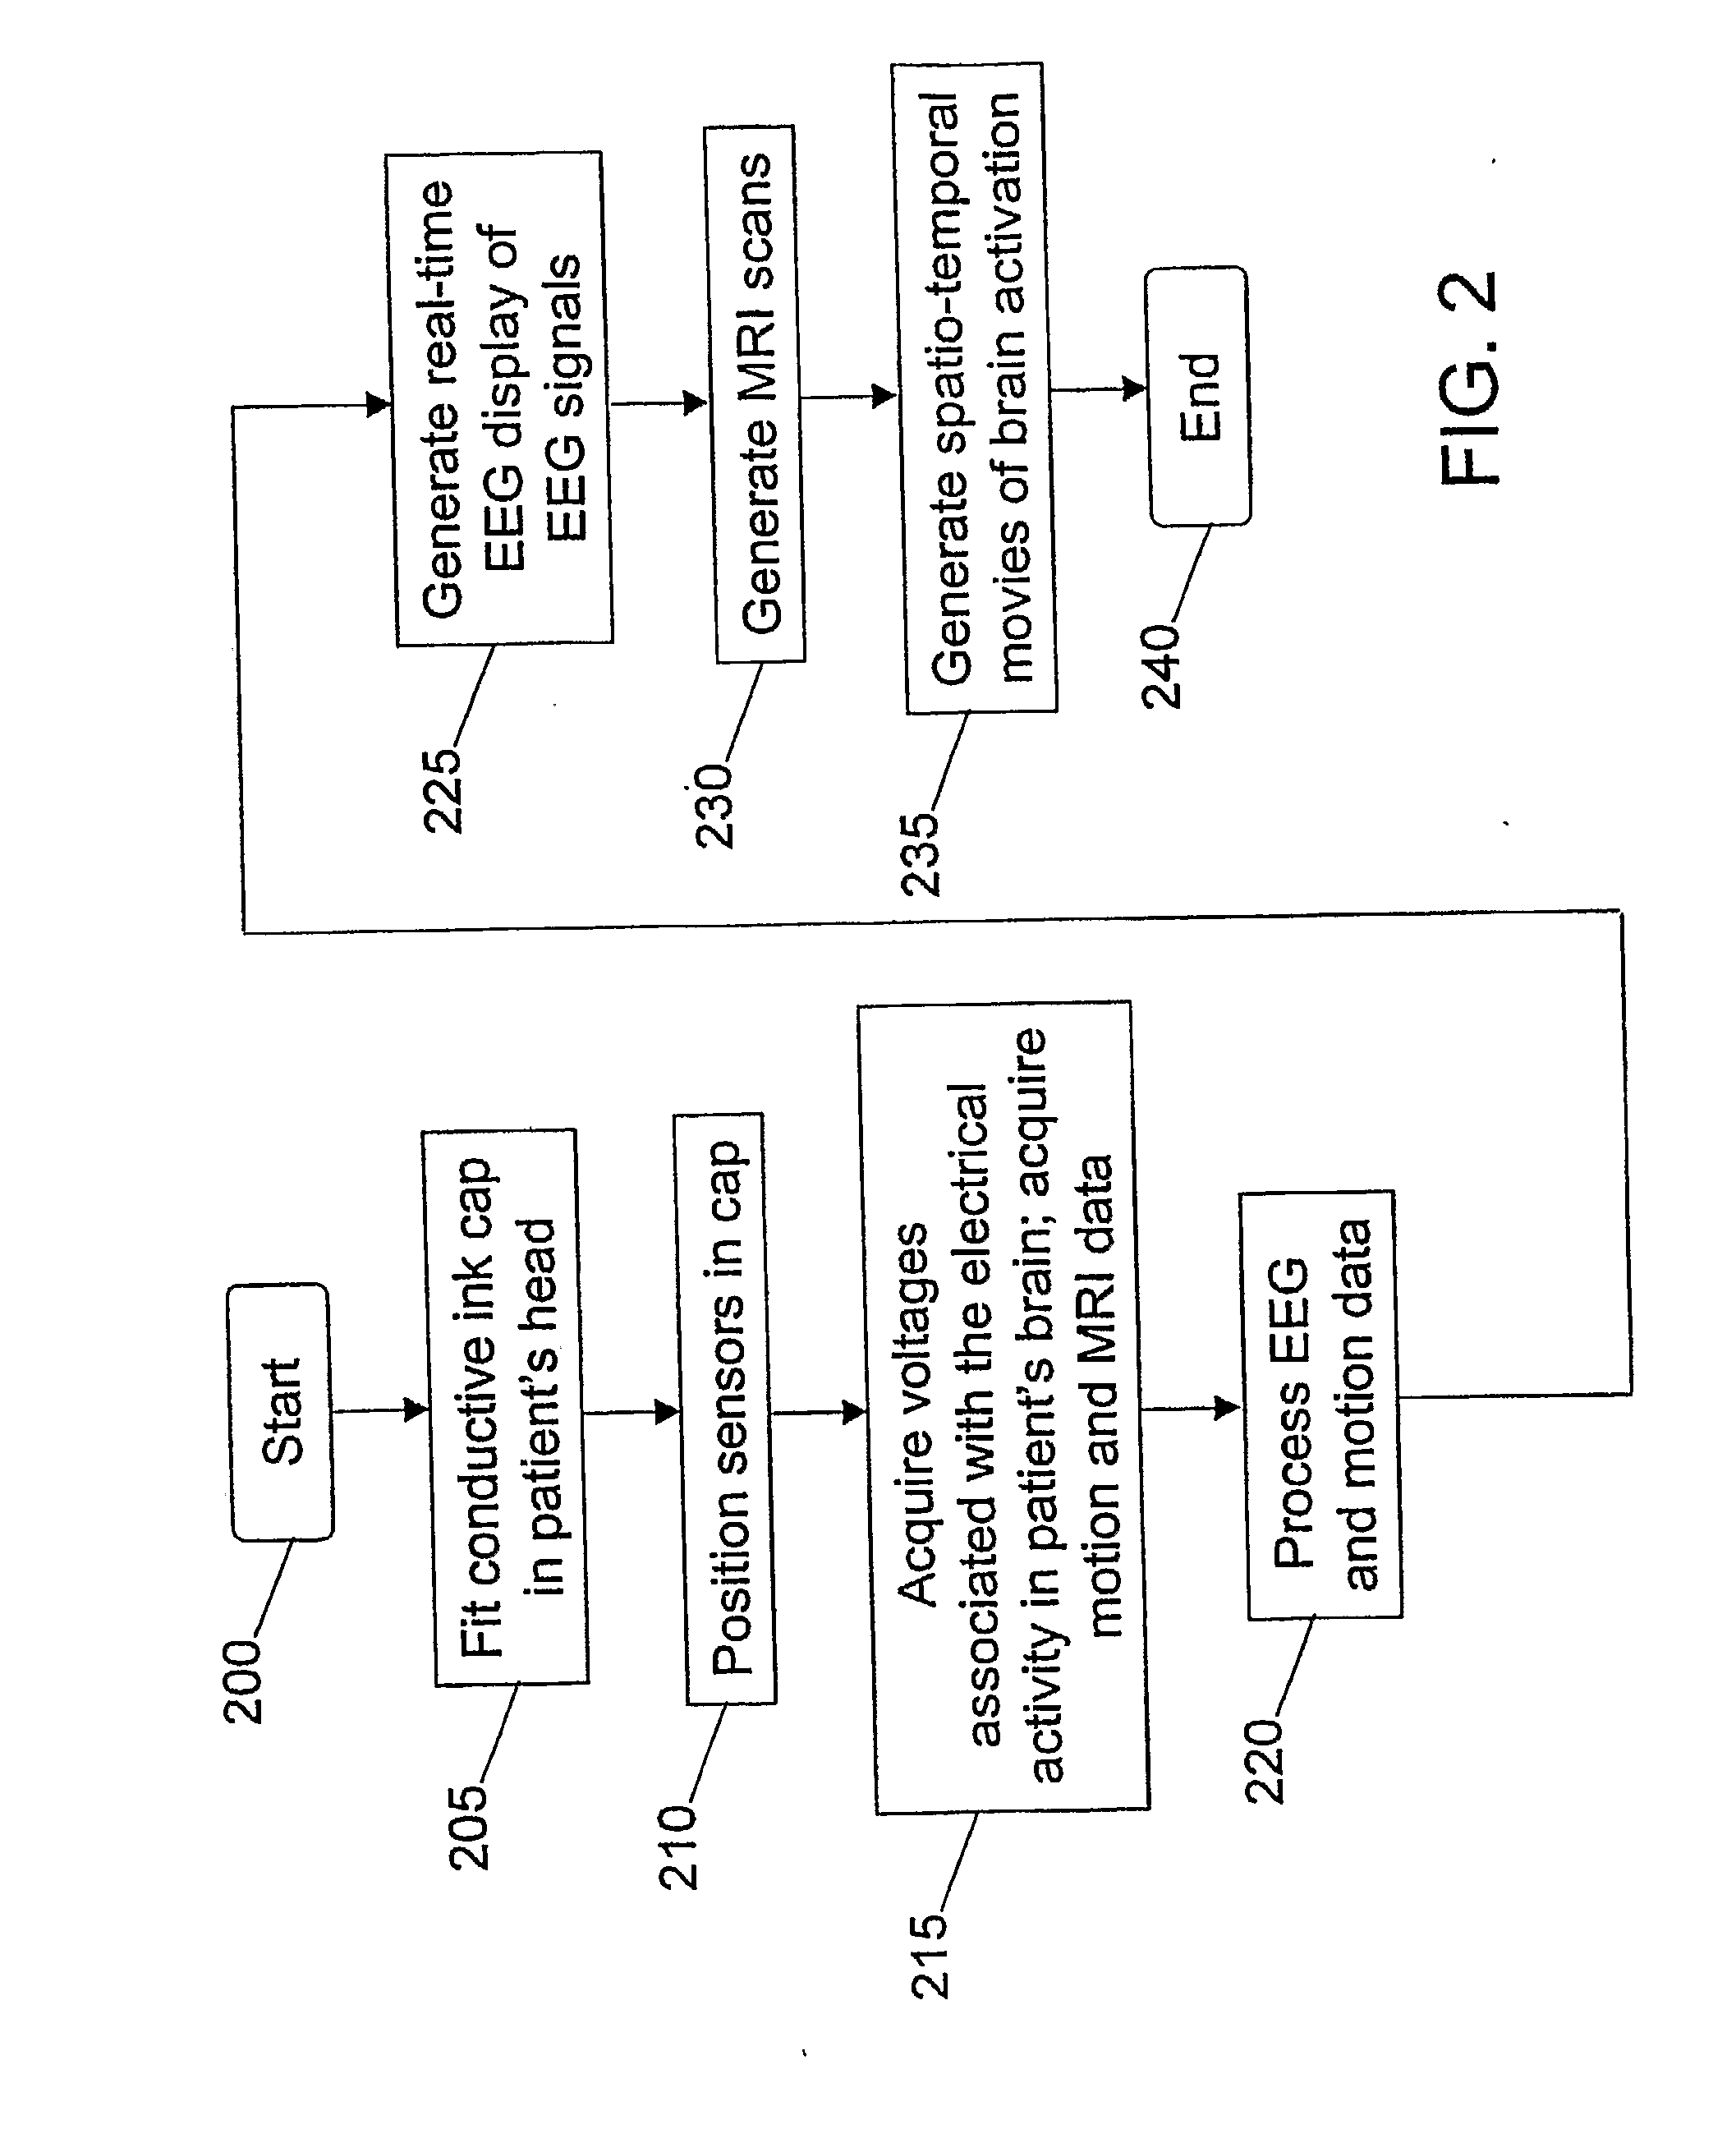 Apparatuses and Methods For Electrophysiological Signal Delivery and Recording During Mri